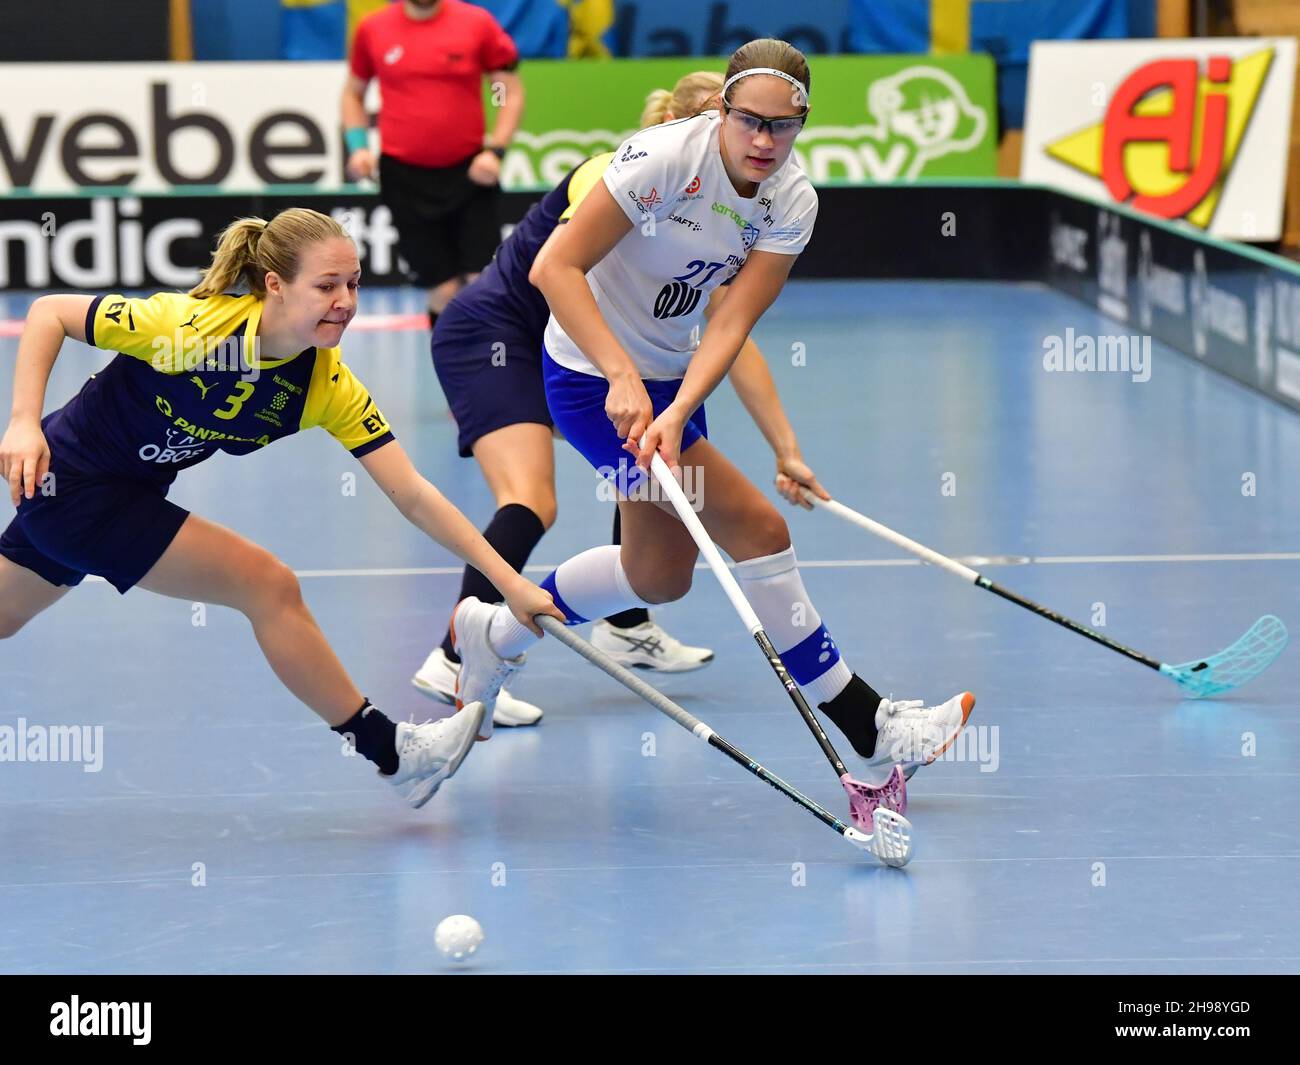 Innebandy High Resolution Stock Photography and Images - Alamy